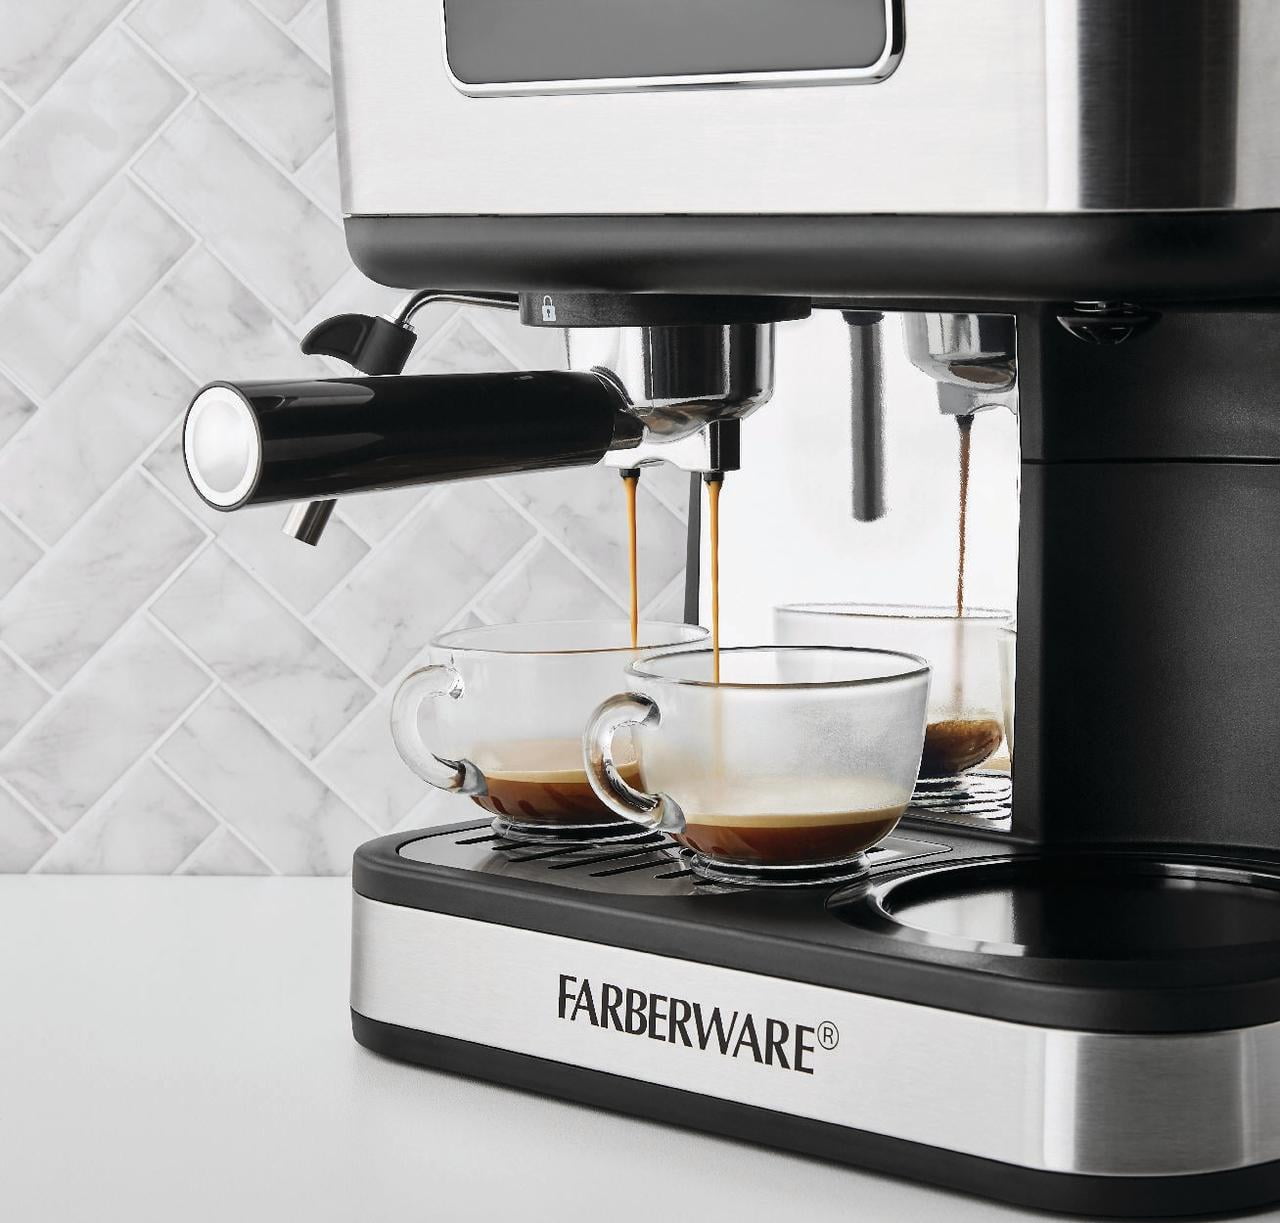 Farberware Dual Brew Side by Side Coffee Maker - NO CARAFE 655772020932